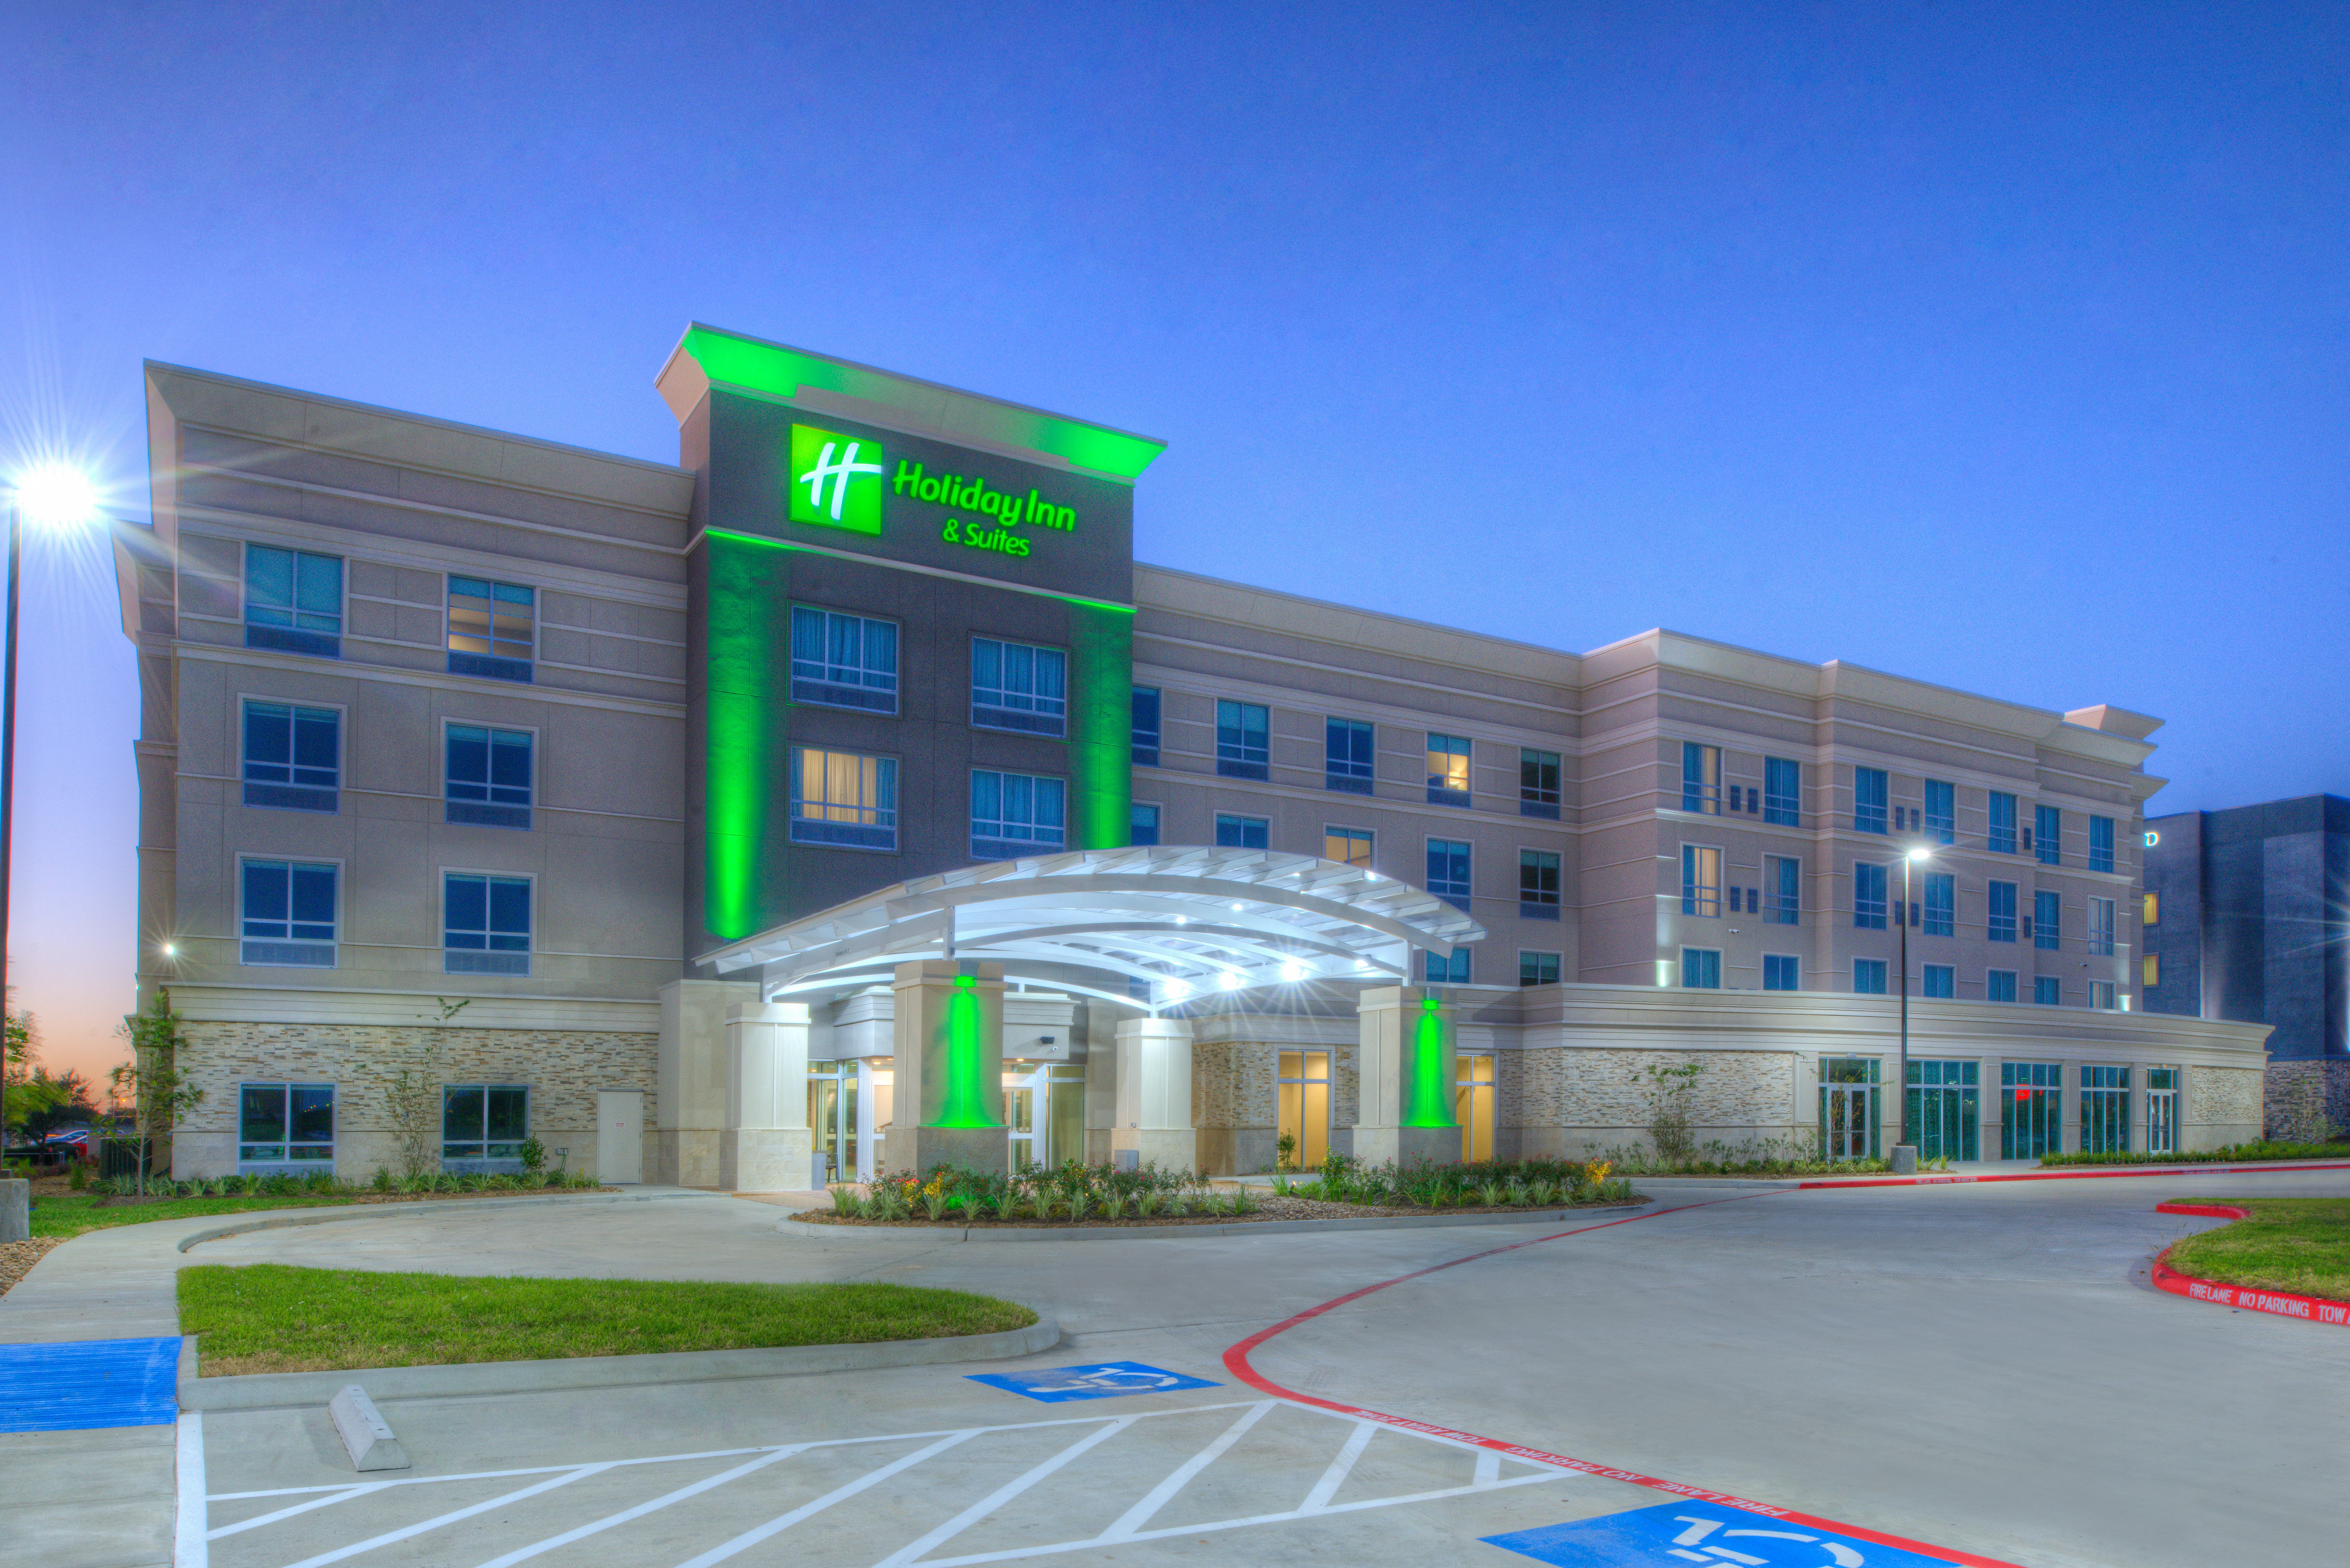 Welcome to Holiday Inn & Suites Hotel in Katy